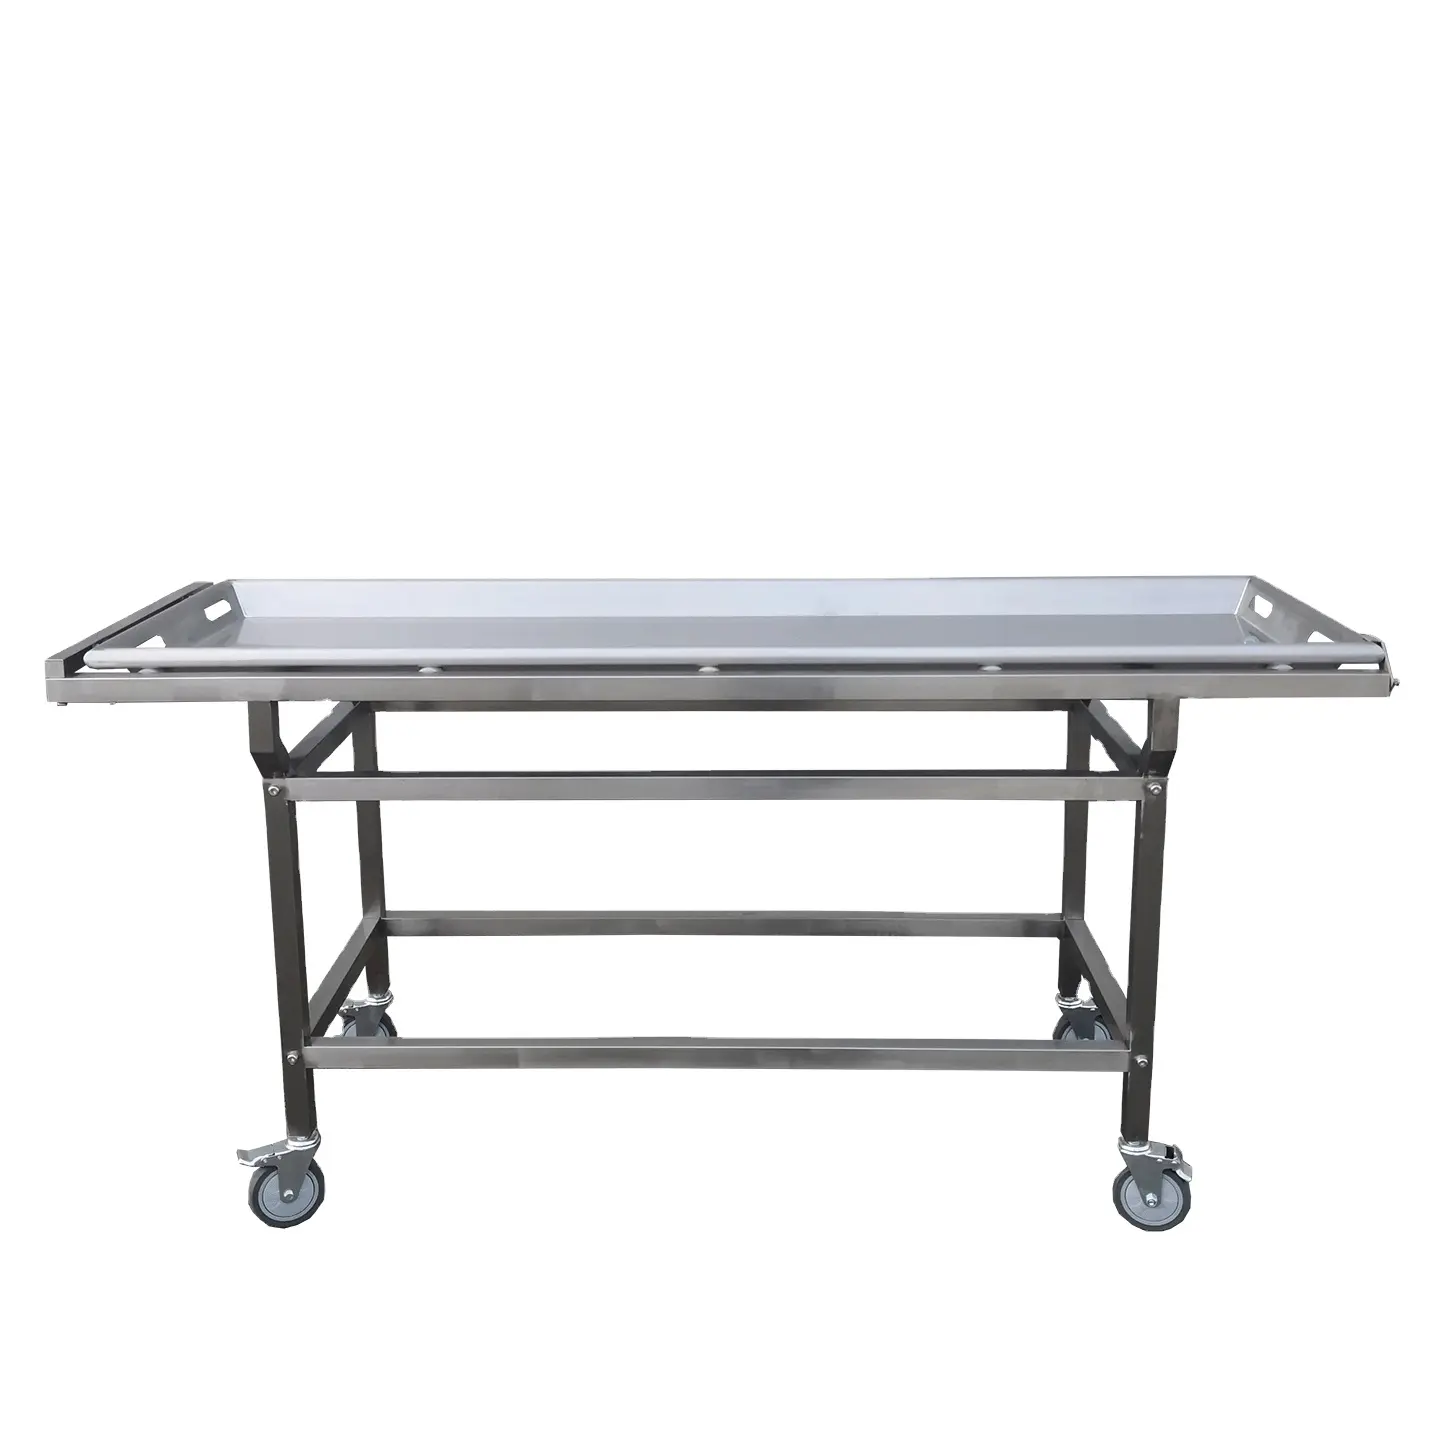 humanization design hospital equipment dissection trolley could used with sink